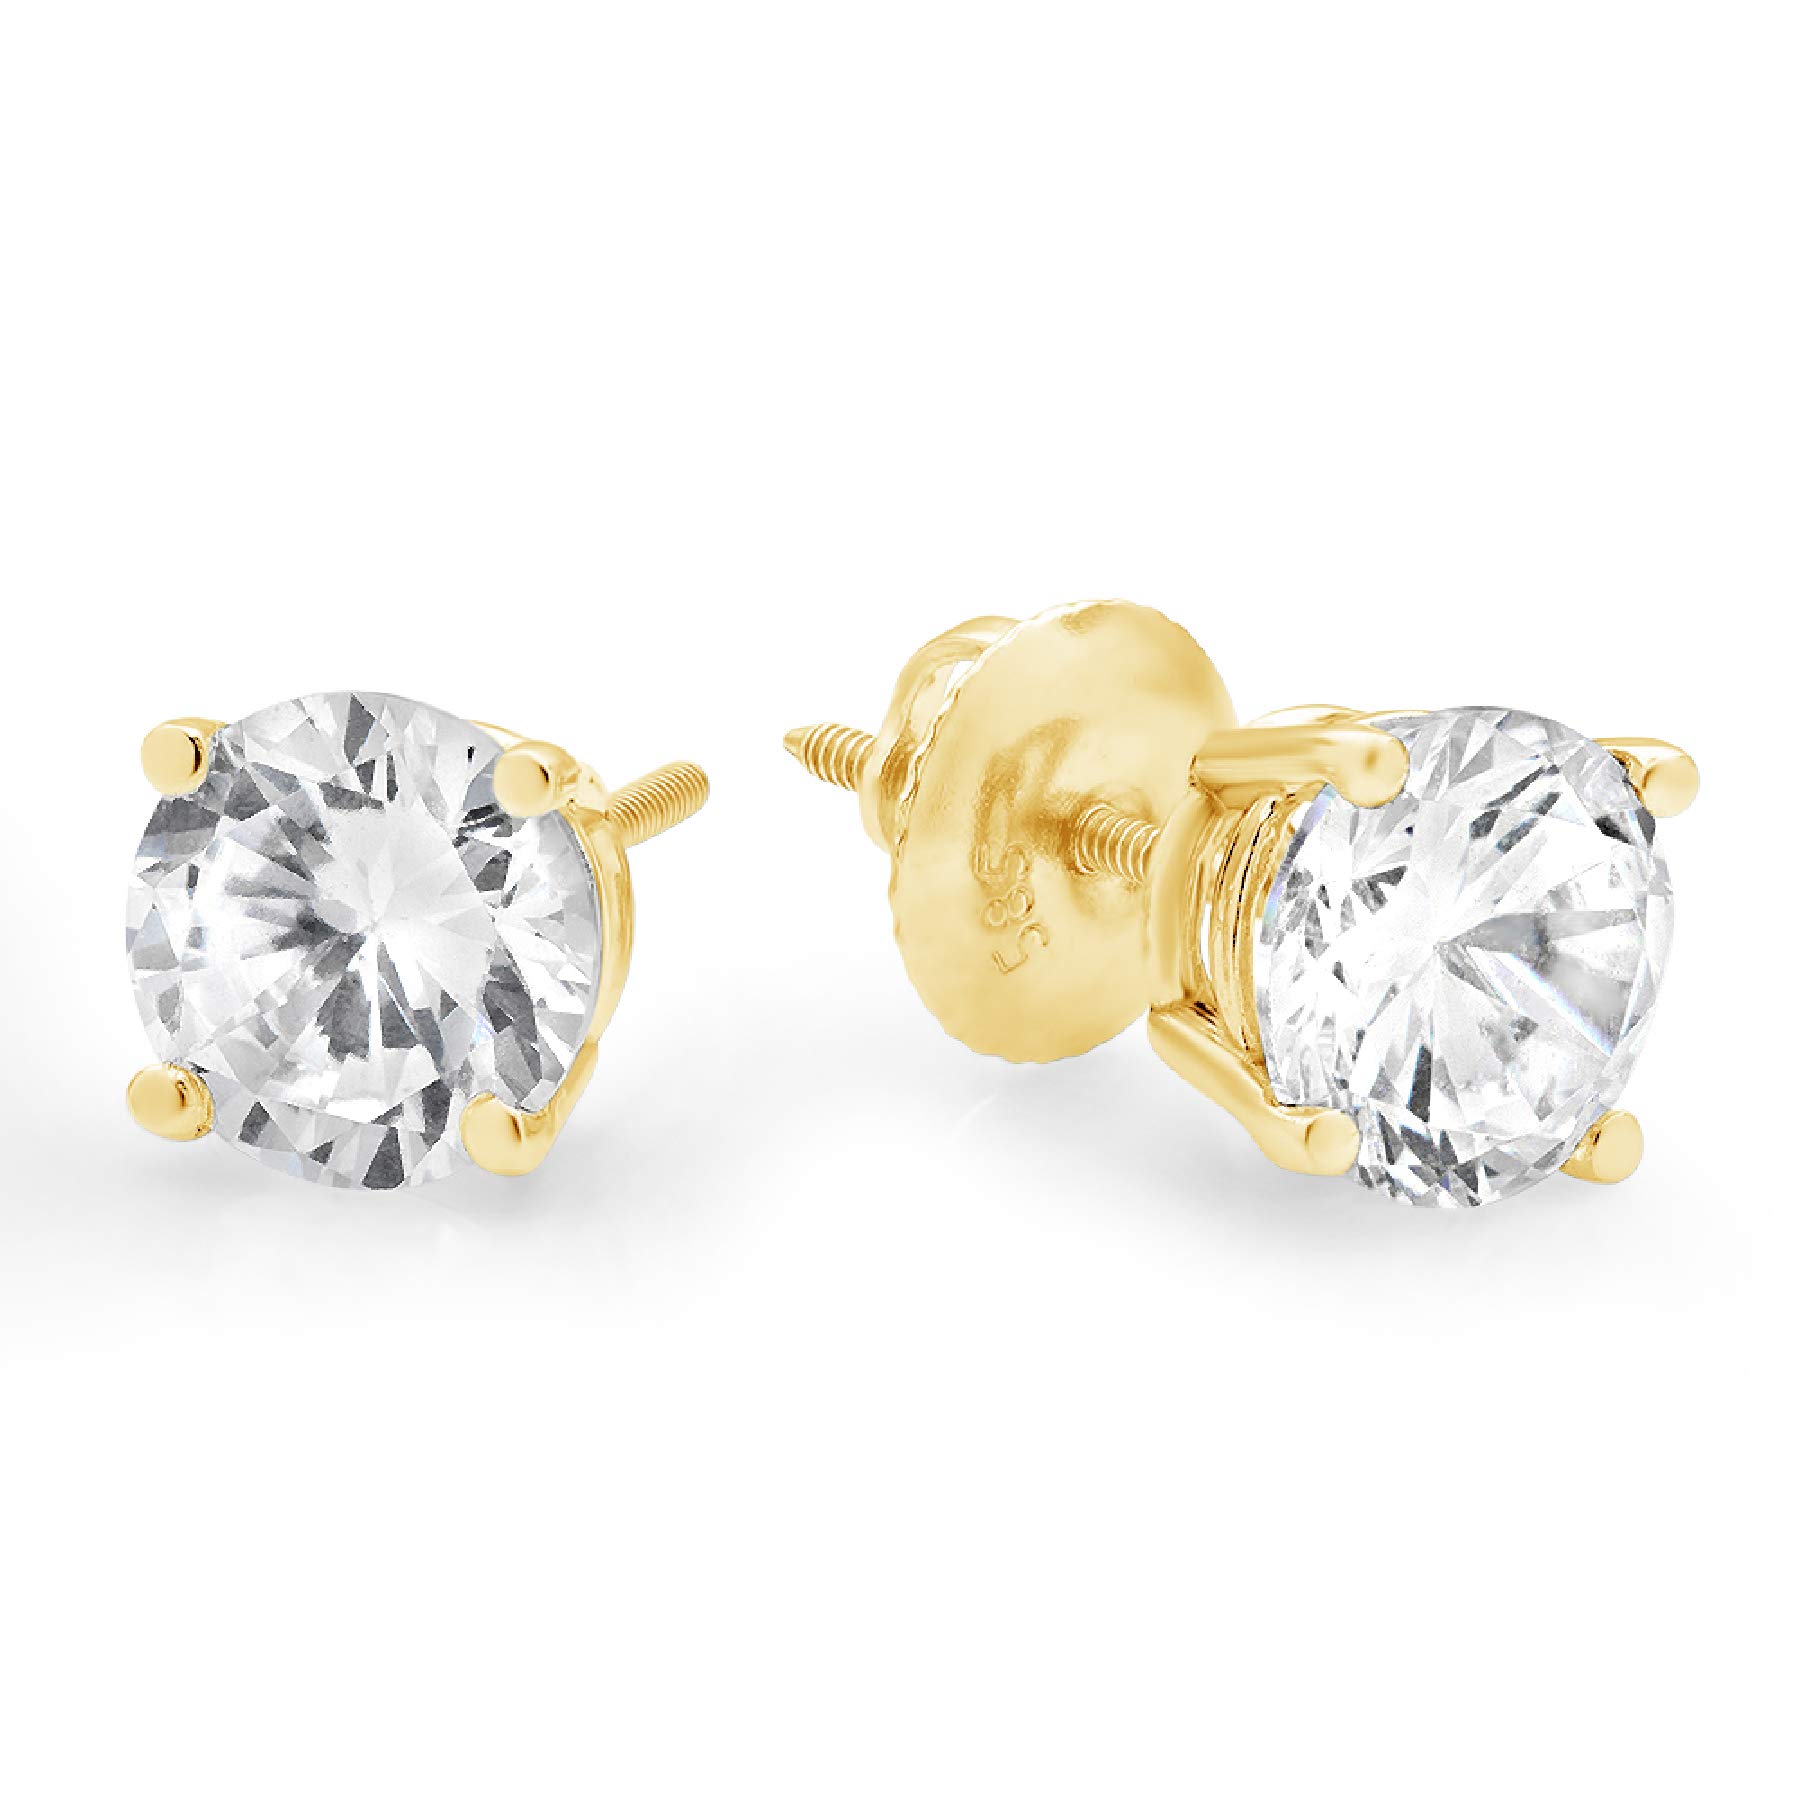 Clara Pucci 2.0 ct Brilliant Round Cut Solitaire Studs with Clear Moissanite - VVS1 and Color D Crystal Stone 14K Yellow Gold Pair of Stud Earrings Screw Back